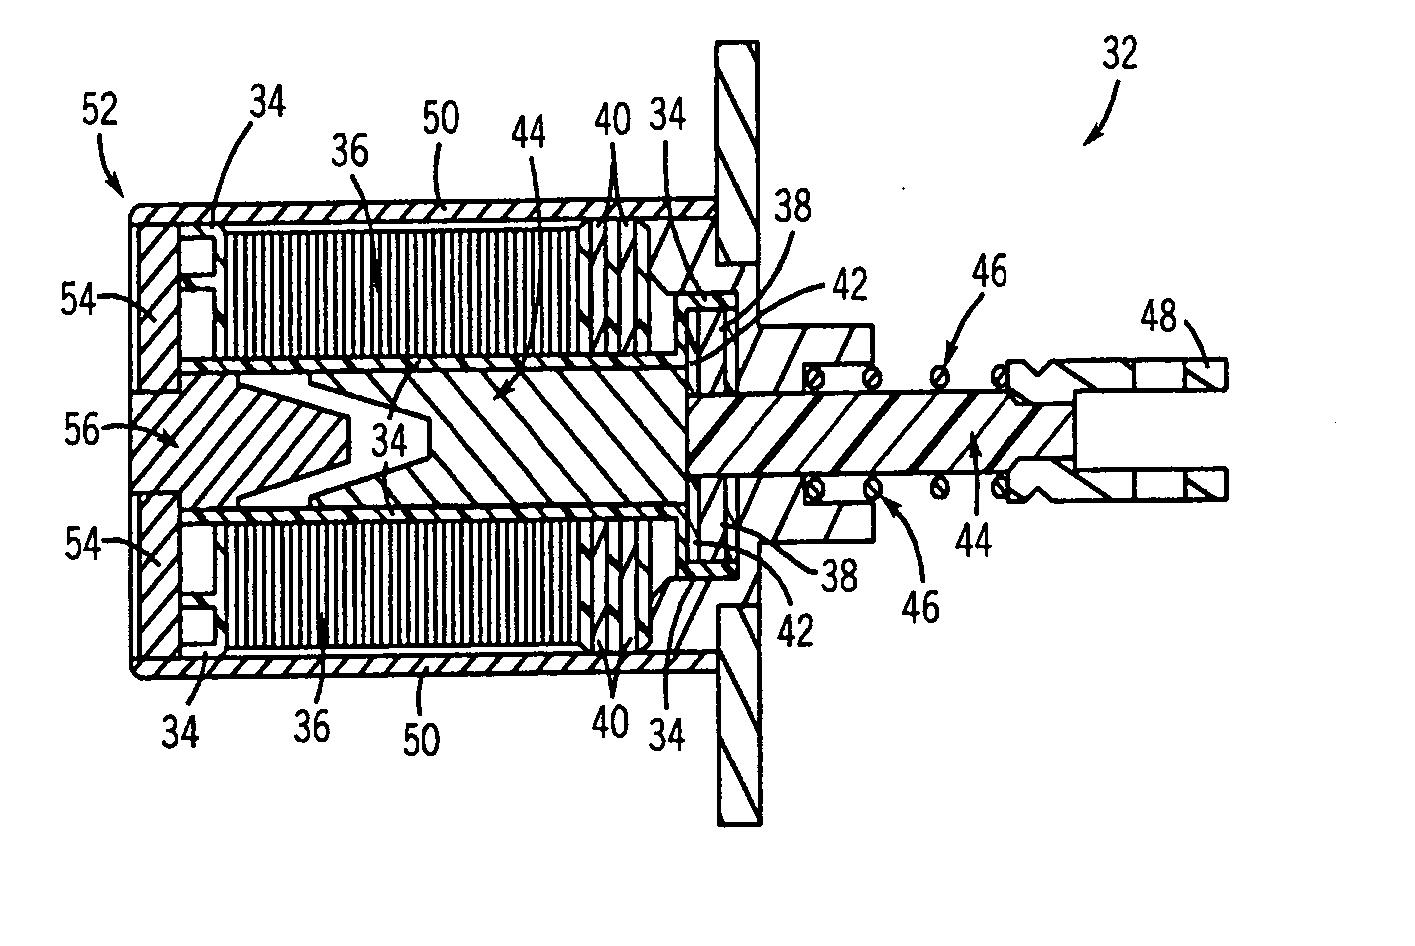 Single coil solenoid having a permanent magnet with bi-directional assist